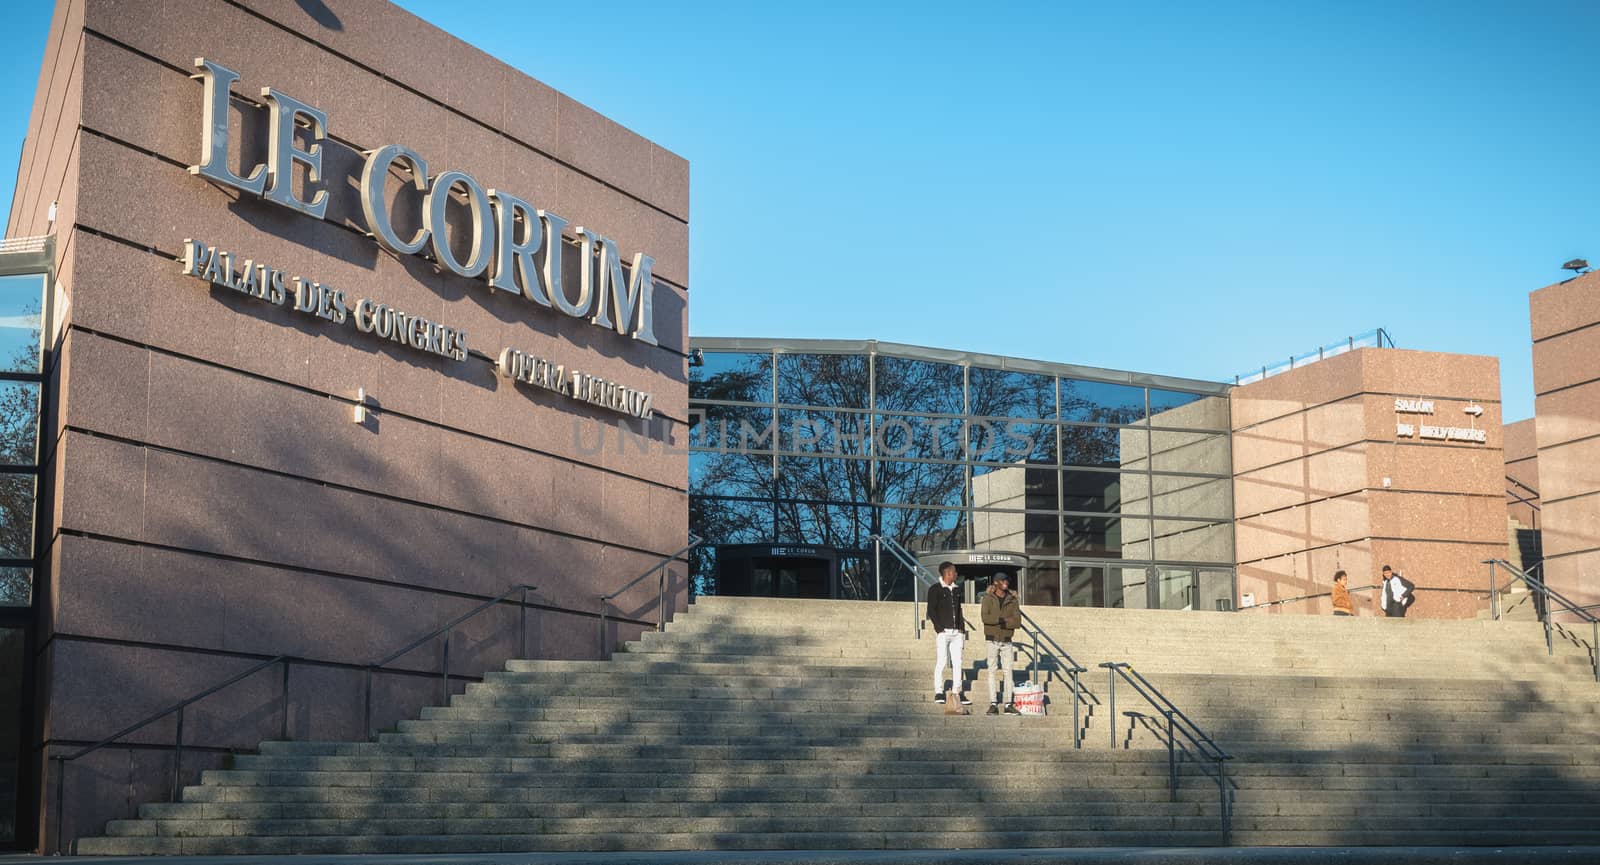 architectural detail of the Corum, a convention center and Opera by AtlanticEUROSTOXX